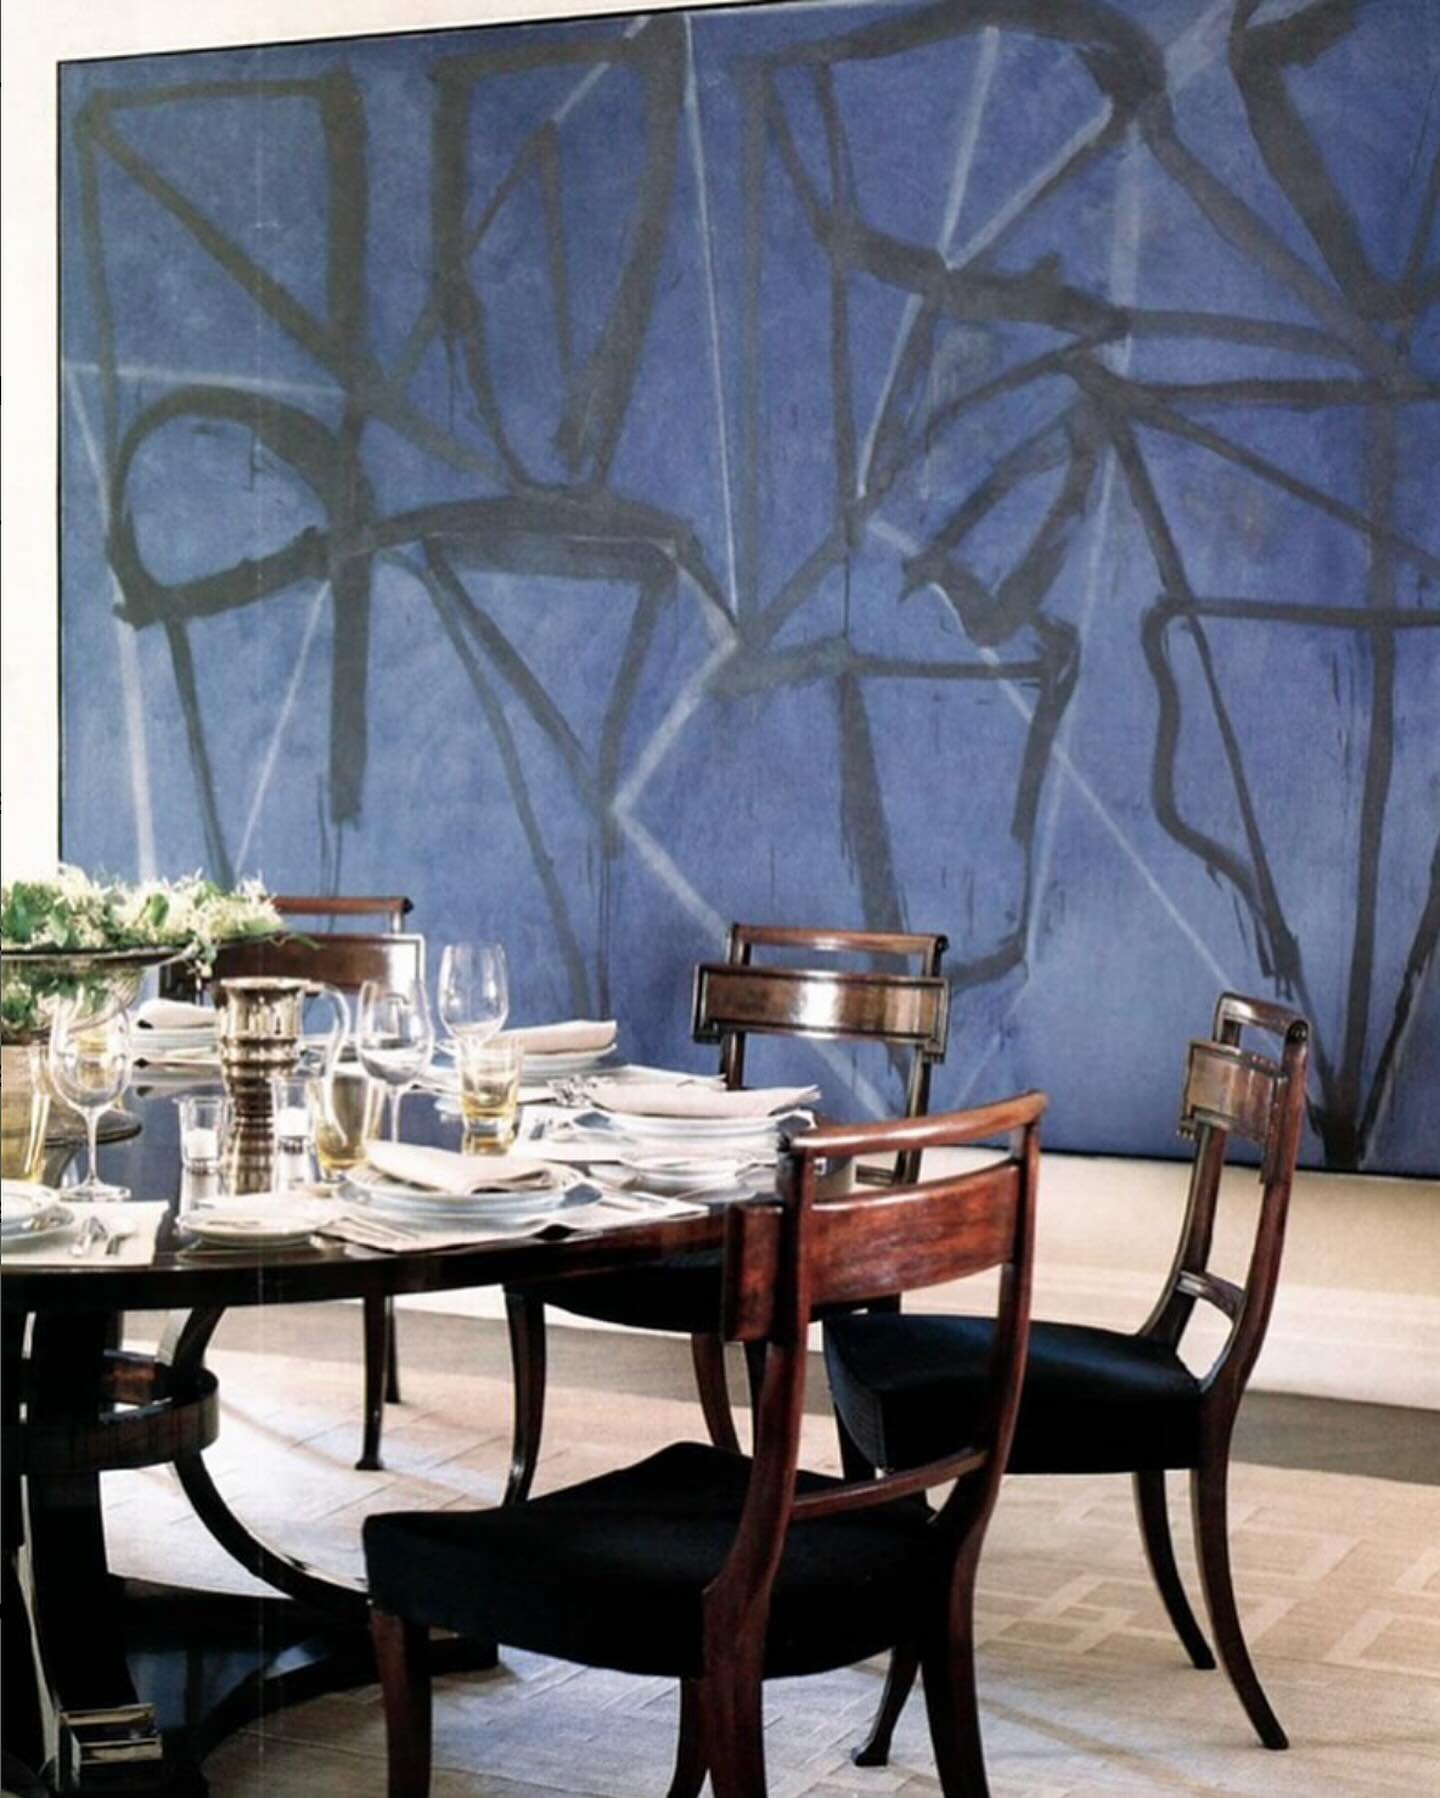 Brice Marden, Blue Horizontal, 1986-87, defines the dining experience in a Park Ave apartment with subdued English regency chairs featuring an elegant curved klismos-inspired back and a mahogany table designed by David Kleinberg.

Via @abstract.mag 
